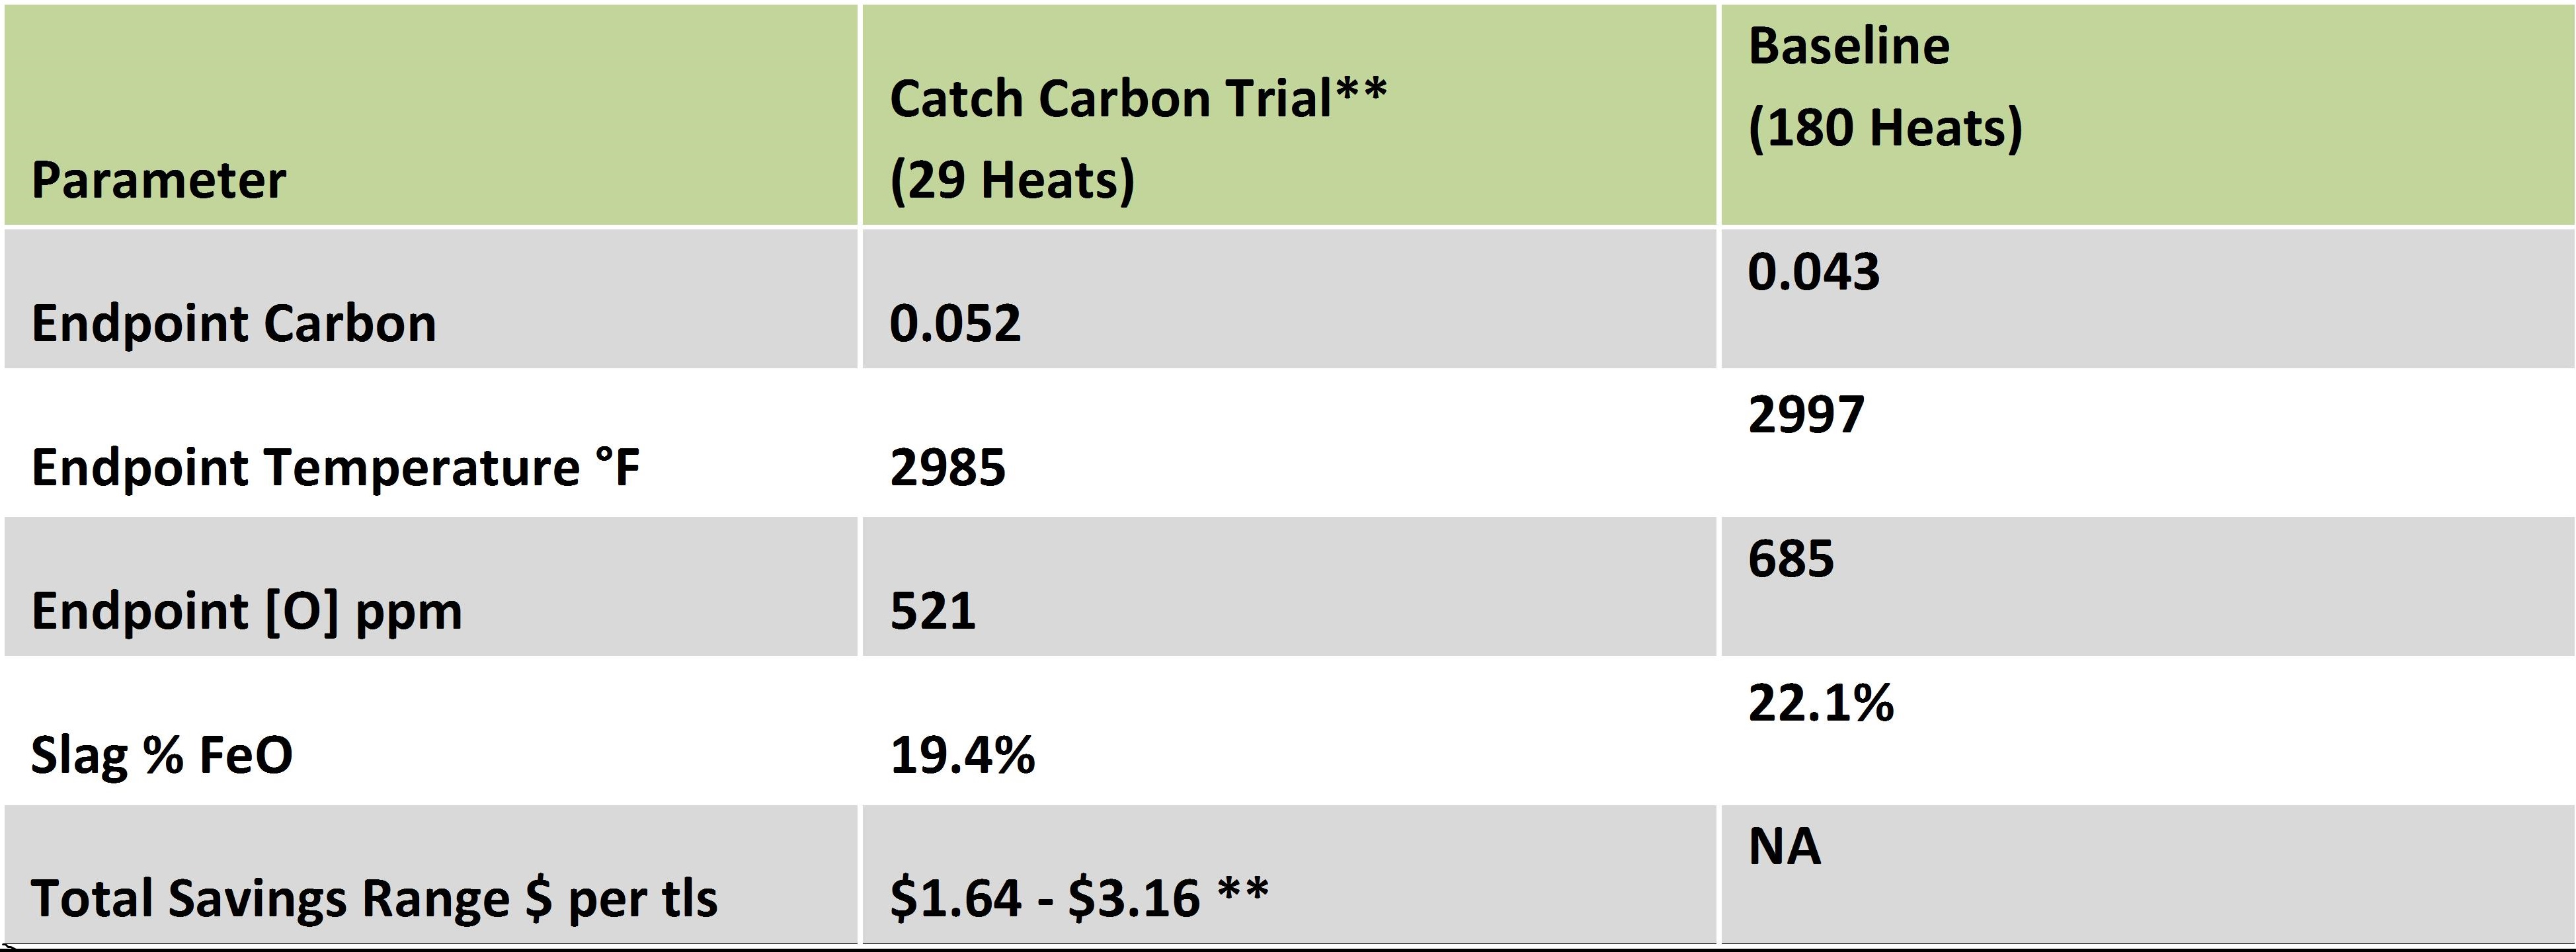 Confirmed Savings with a Catch Carbon Practice